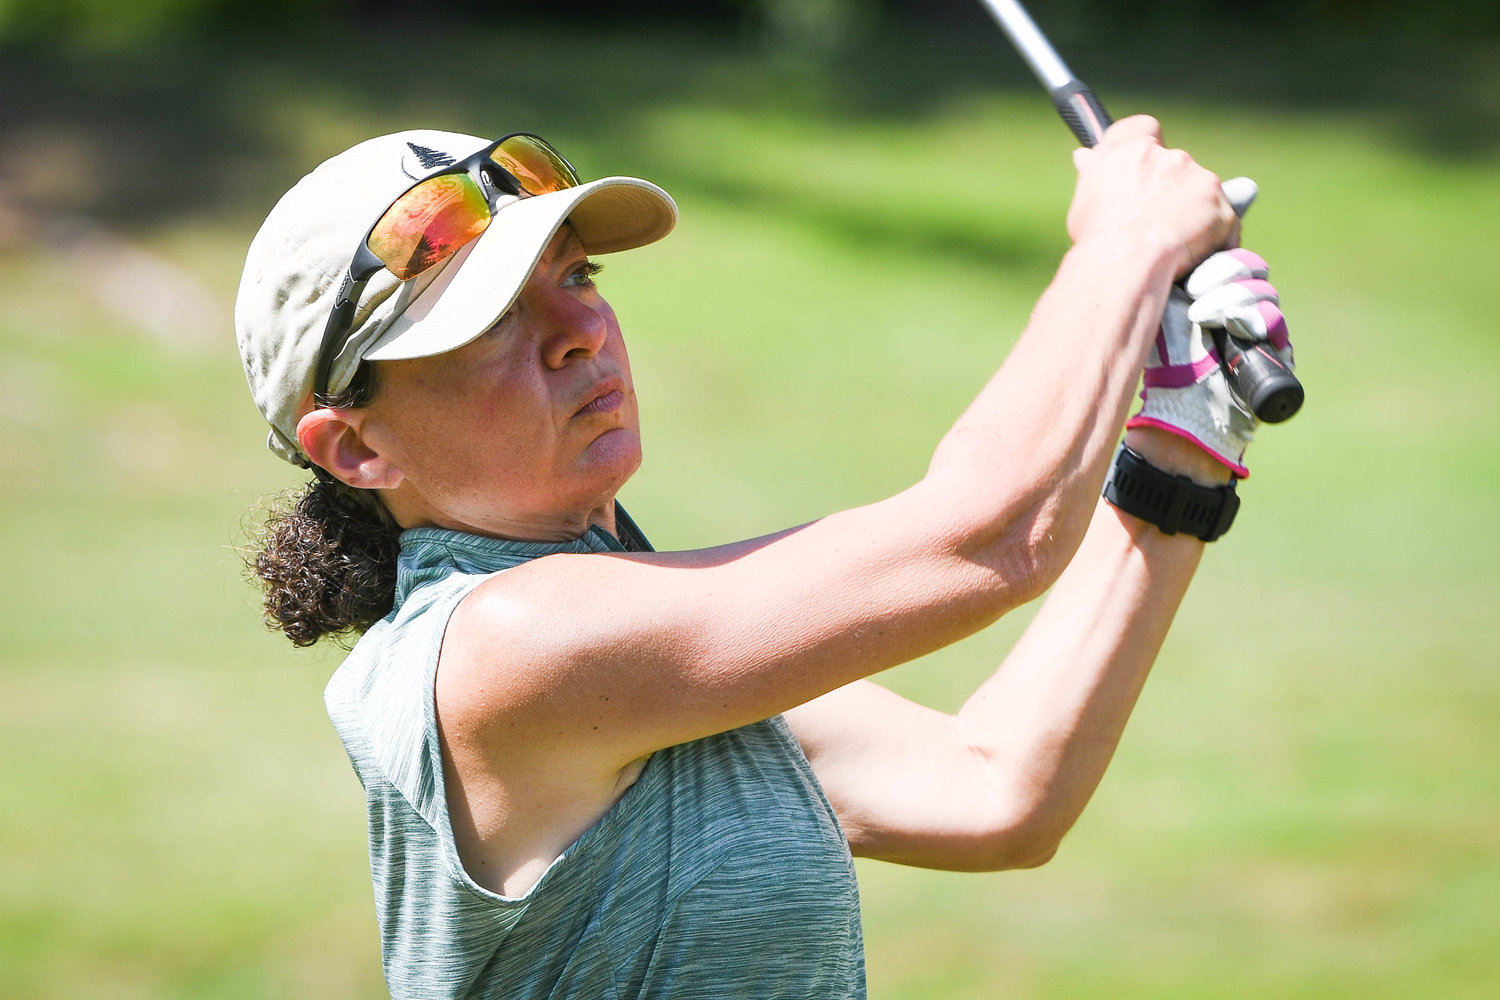 Kathy Garbooshian watches her shot in the Rome City Women’s Amateur Golf Championship on Monday at Rome Country Club.